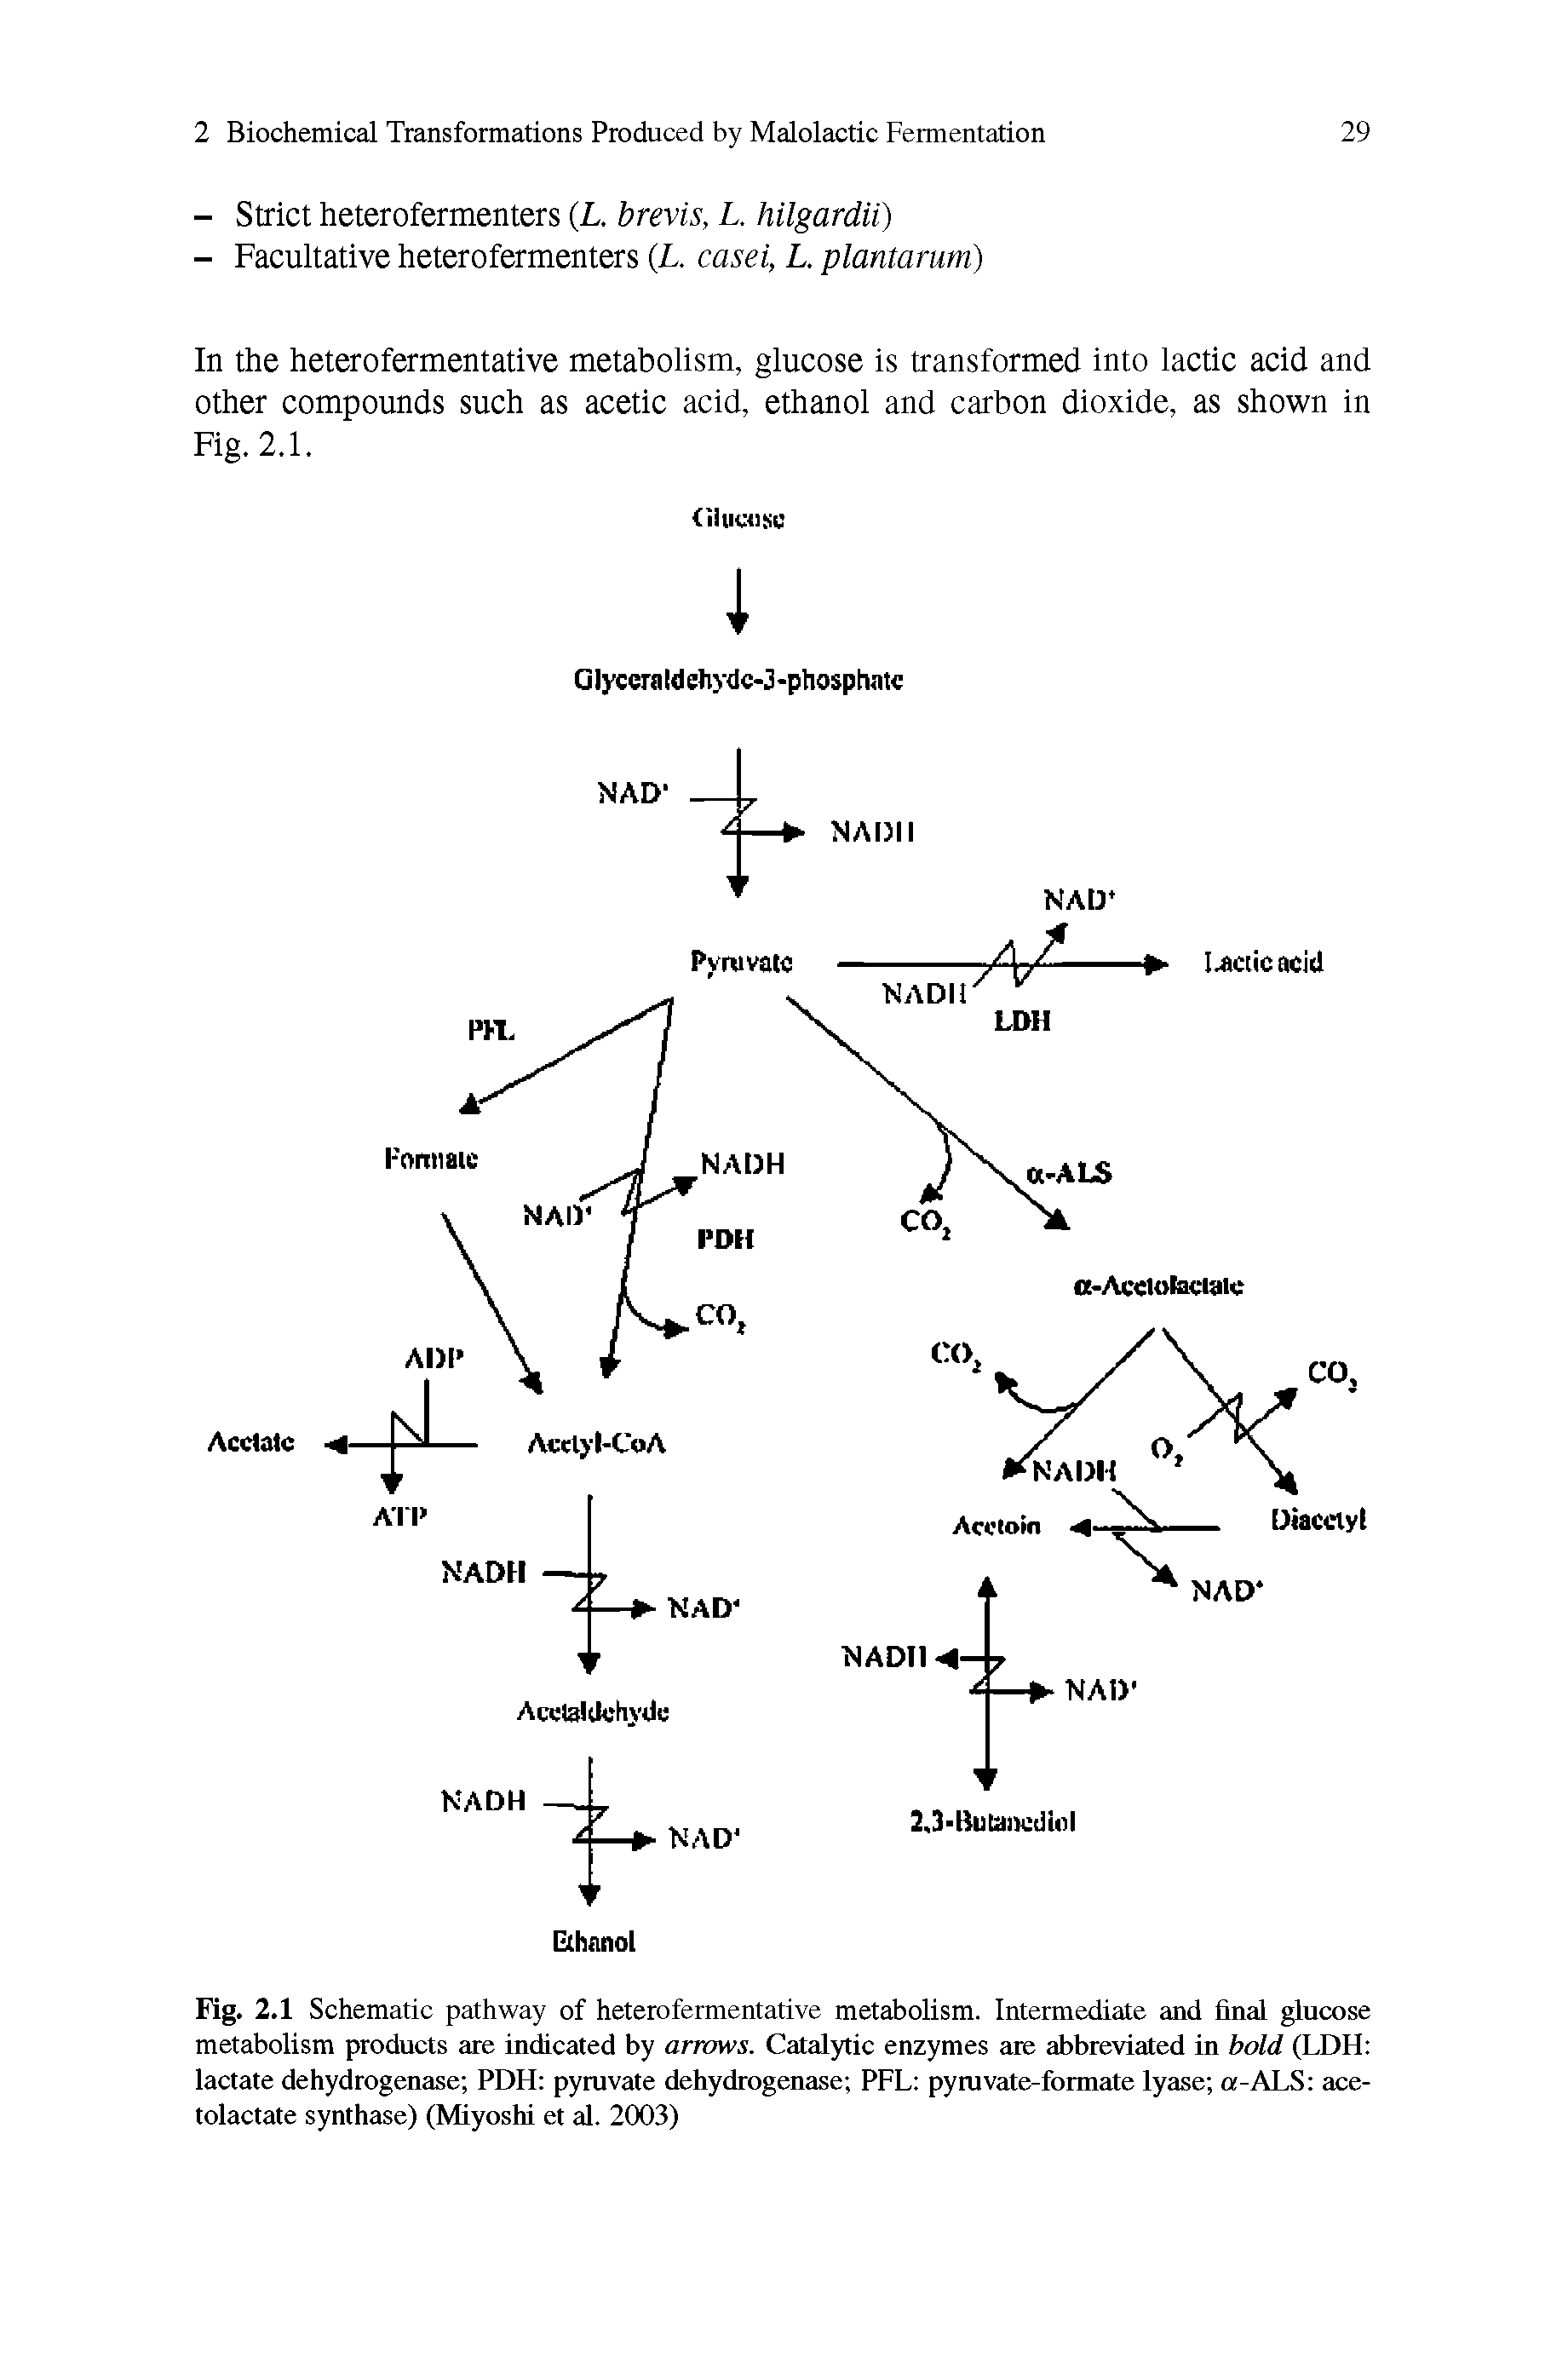 Fig. 2.1 Schematic pathway of heterofermentative metabolism. Intermediate and final glucose metabolism products are indicated by arrows. Catalytic enzymes are abbreviated in bold (LDH lactate dehydrogenase PDH pyruvate dehydrogenase PFL pyruvate-formate lyase a-ALS ace-tolactate synthase) (Miyoshi et al. 2003)...